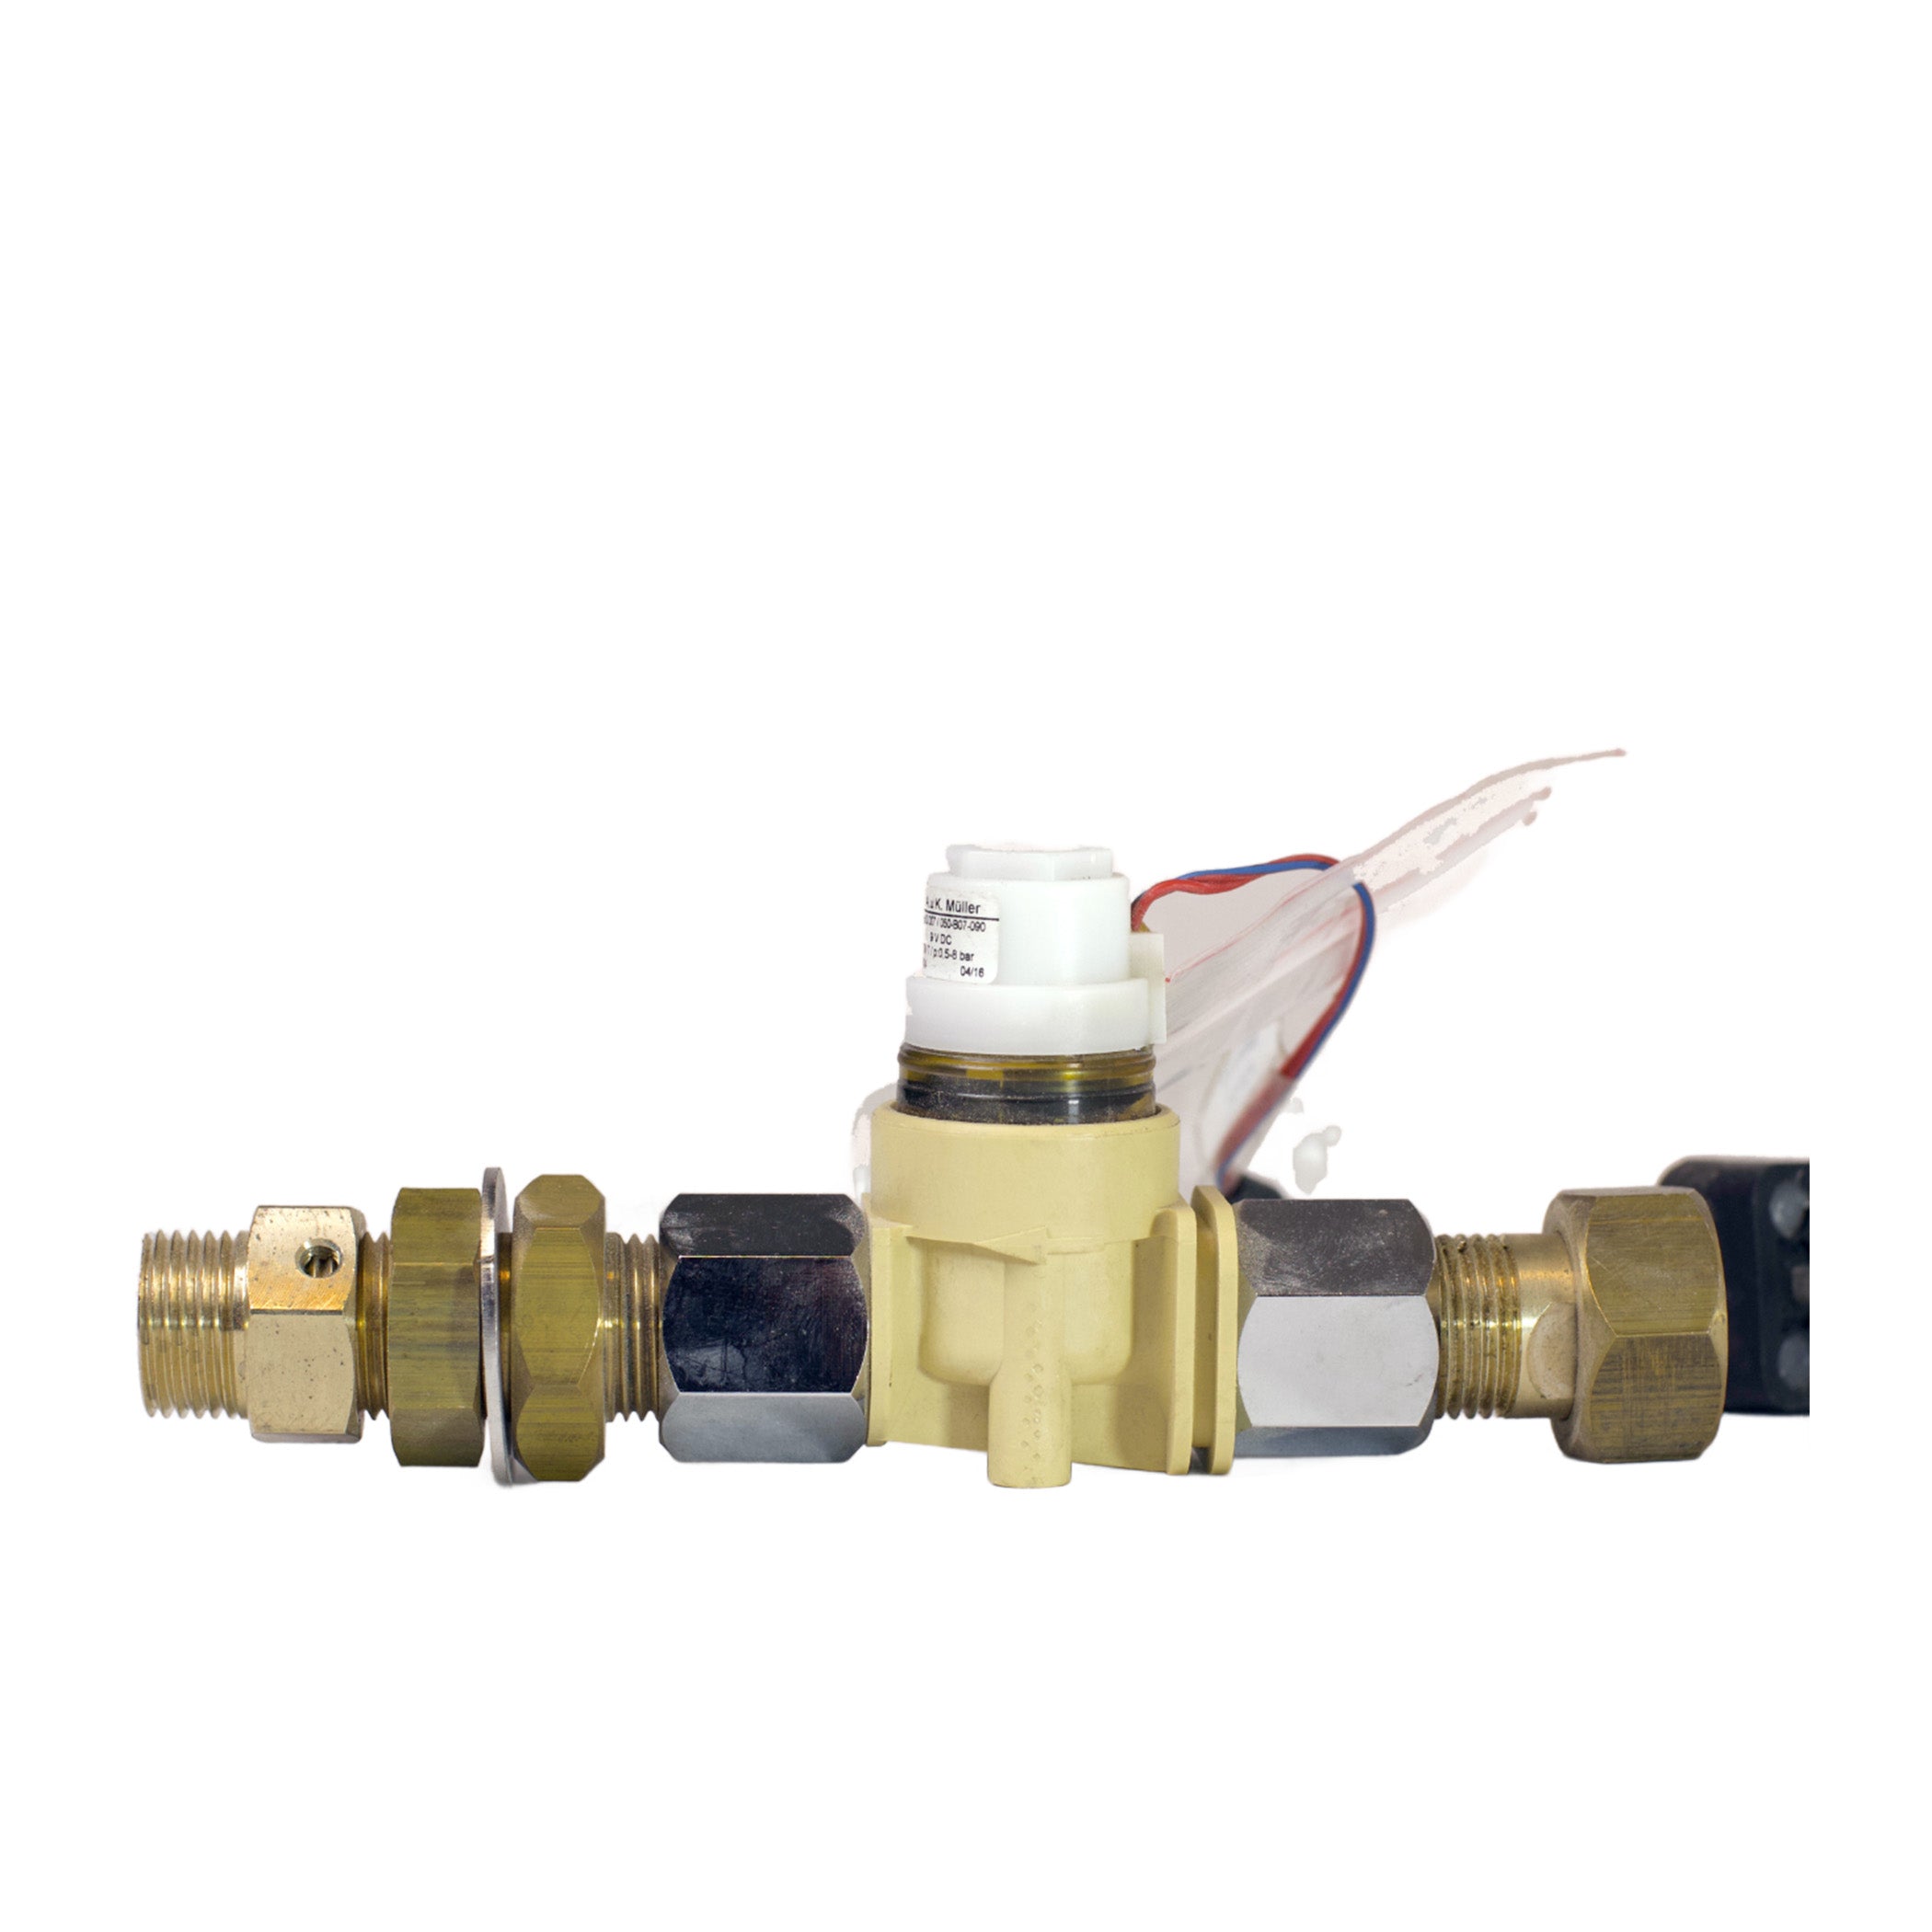 PSE1801 - Solenoid Assembly for Intersan Sanispray Washfountain with Sprayring